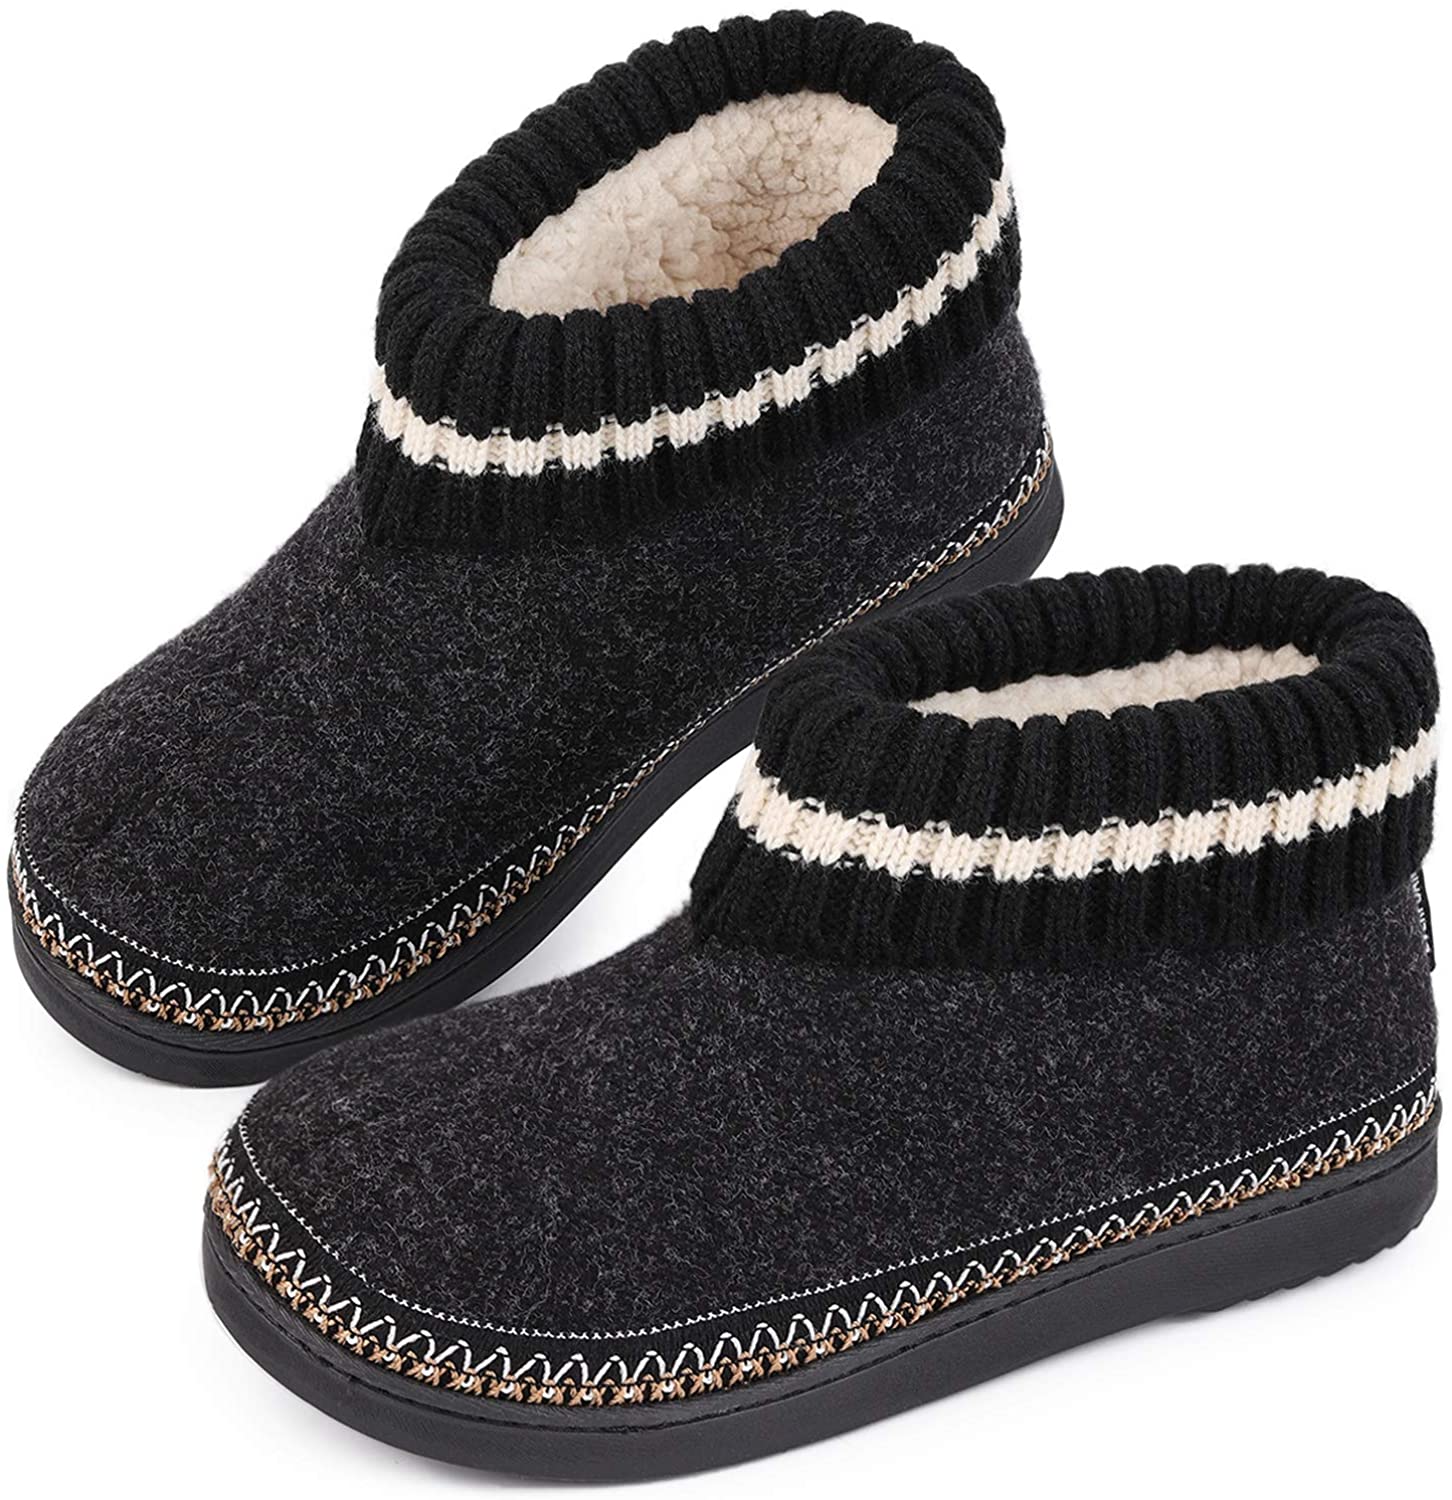 EverFoams Ladies Wool Memory Foam Hi-Top Boot Slippers with Knitted Collar-Black